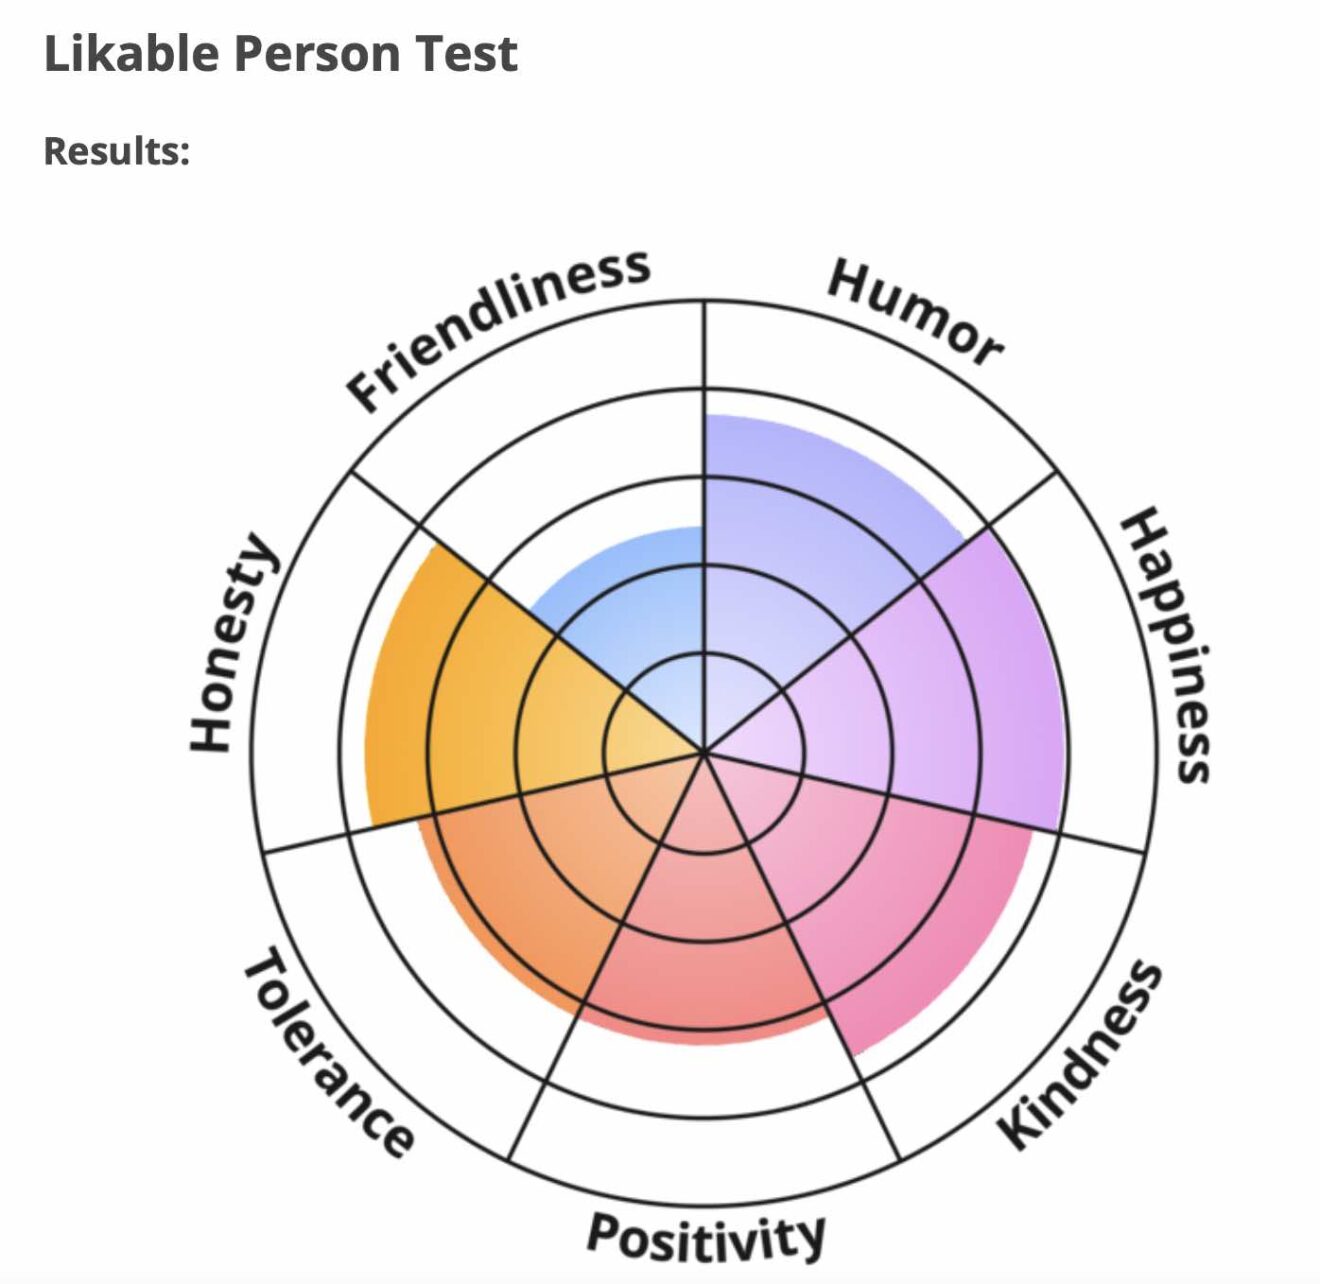 likable person test